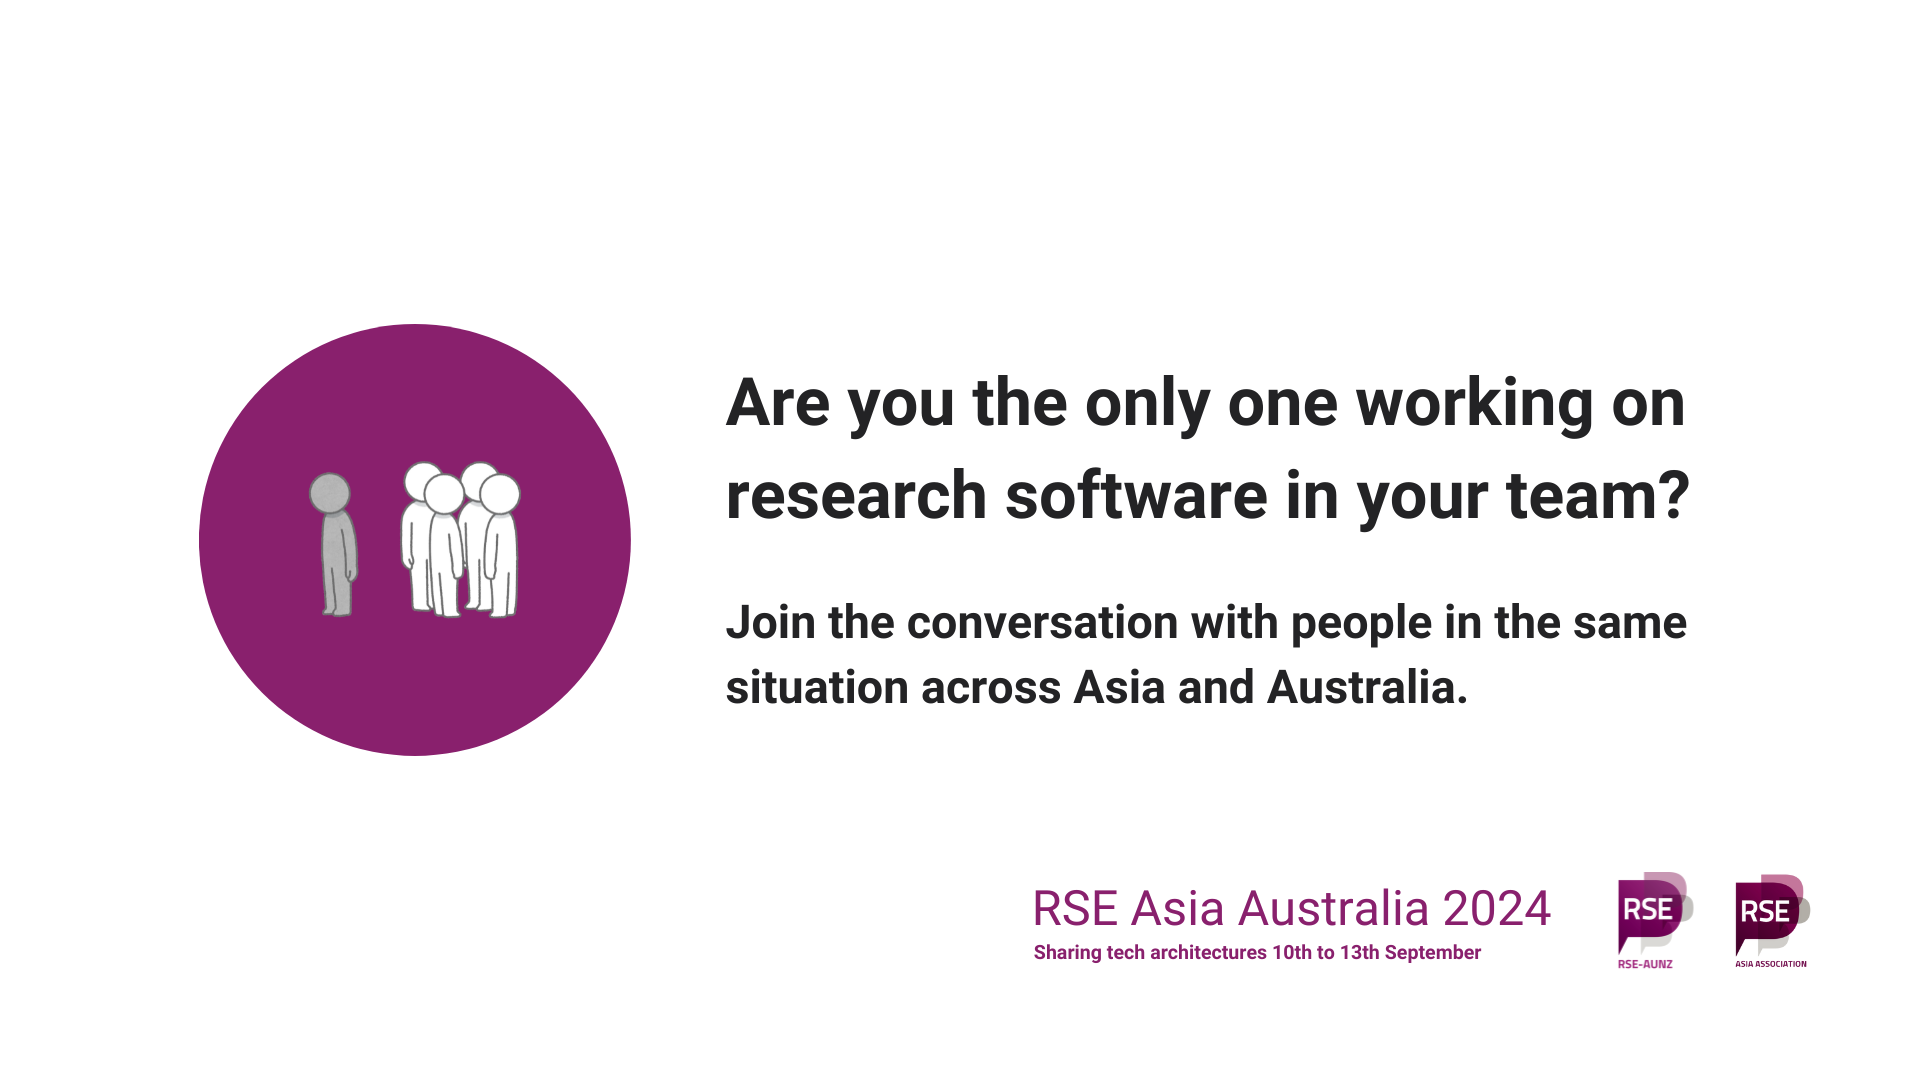 Picture of person in grey away from a group of people in a purple circe. Are you the only one working on research software in your team? Join the conversation with people in the same situation across Asia and Australia. RSE Asia Australia 2024. Sharing tech architectures. 10th to 13th September. Logos of RSE AUNZ and RSE Asia.